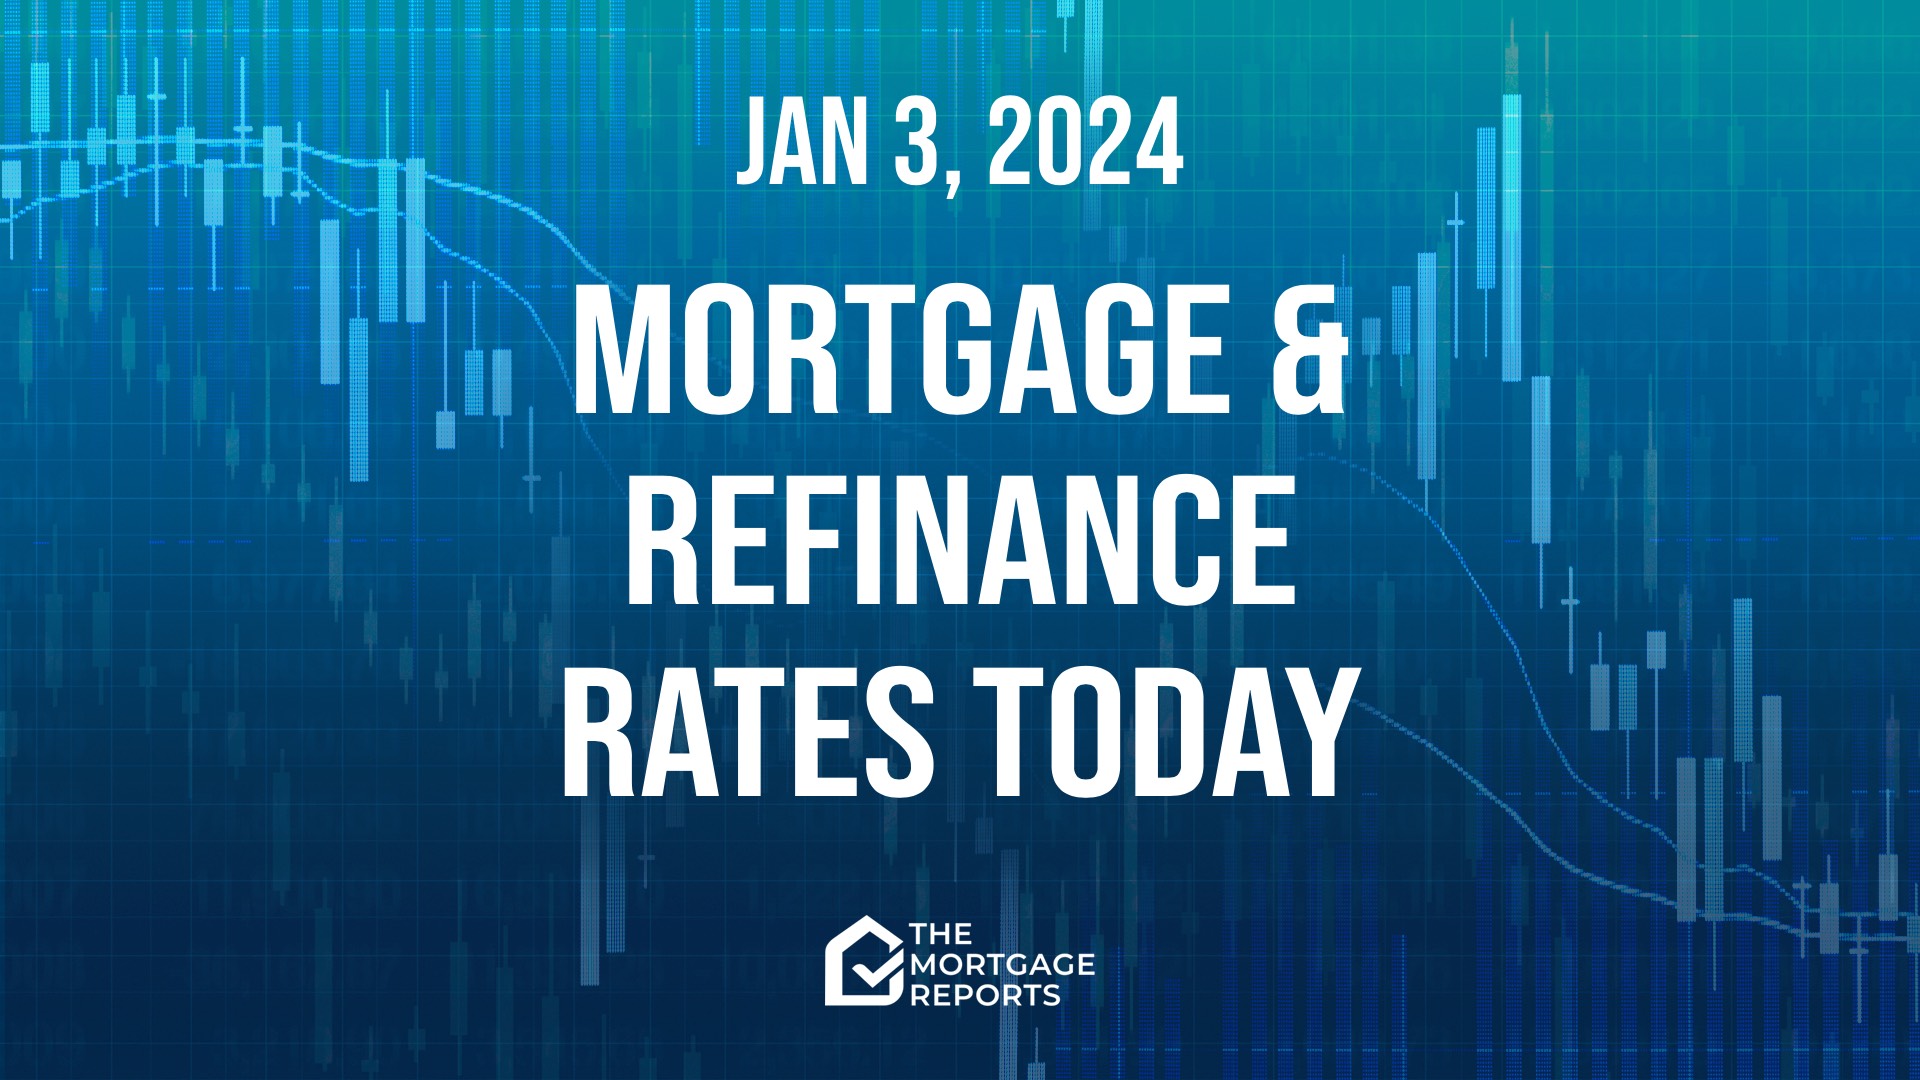 Mortgage rates today, Jan 3, 2024